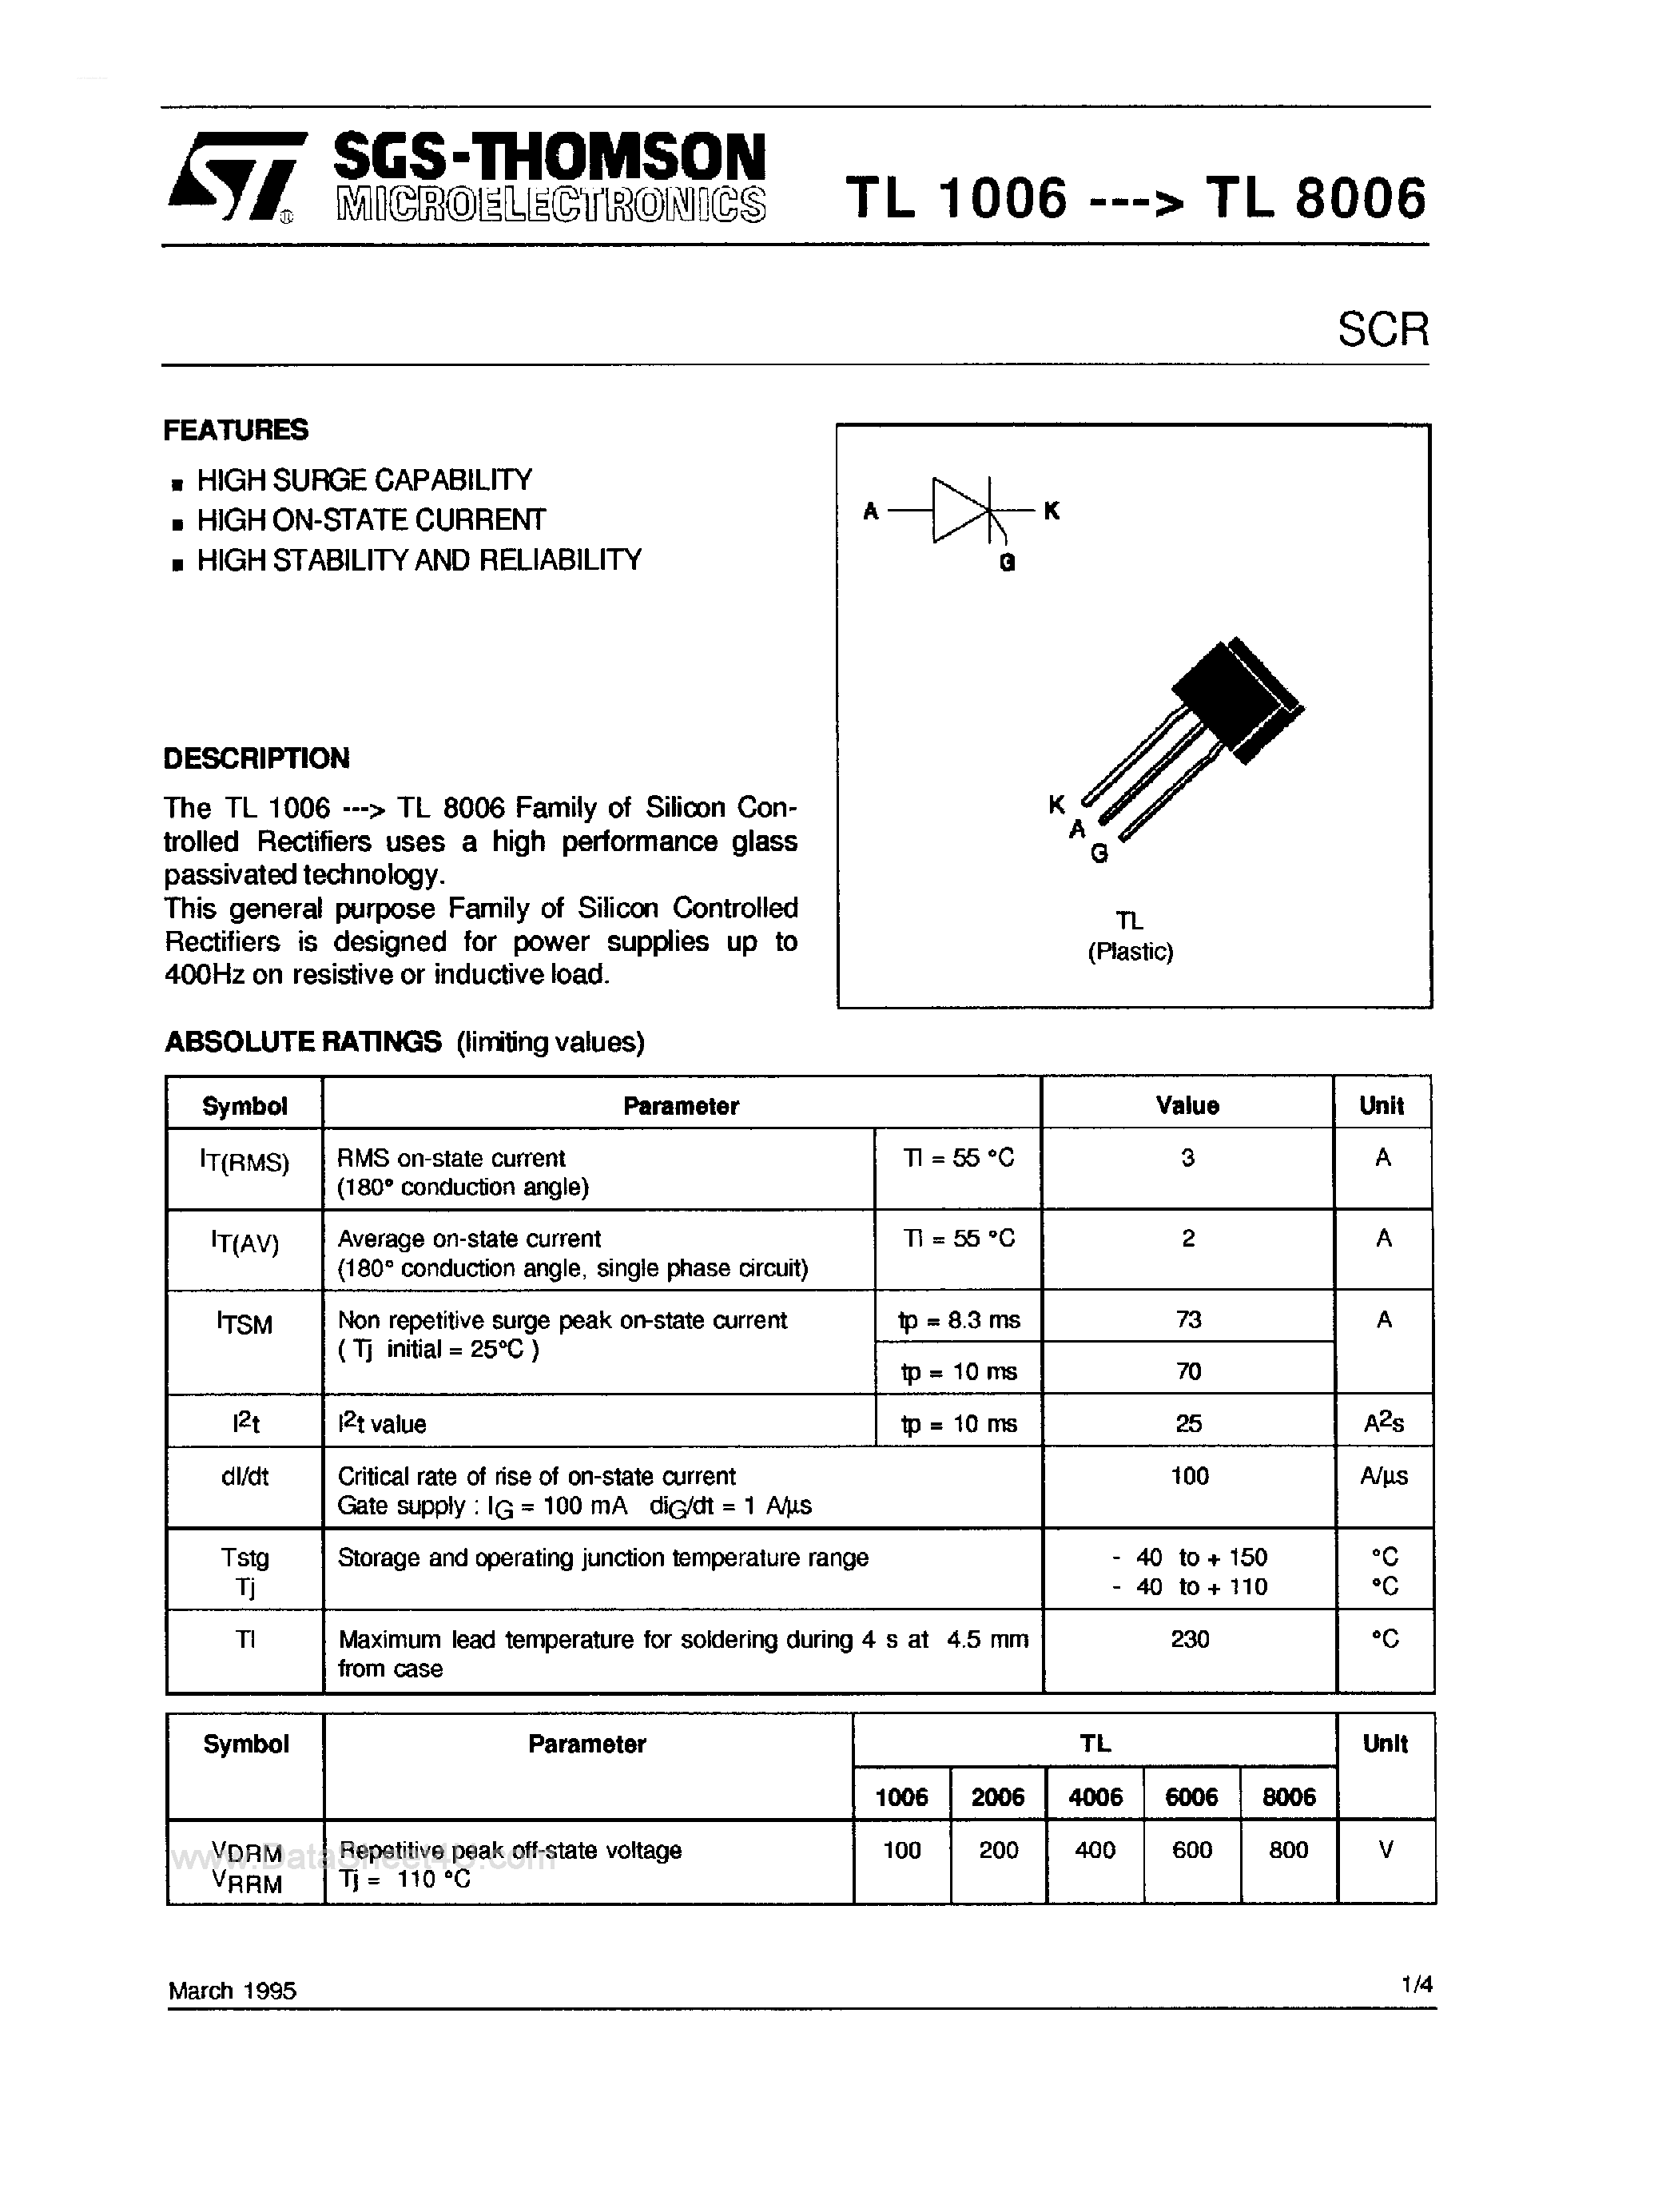 Datasheet TL4006 - SCR page 1